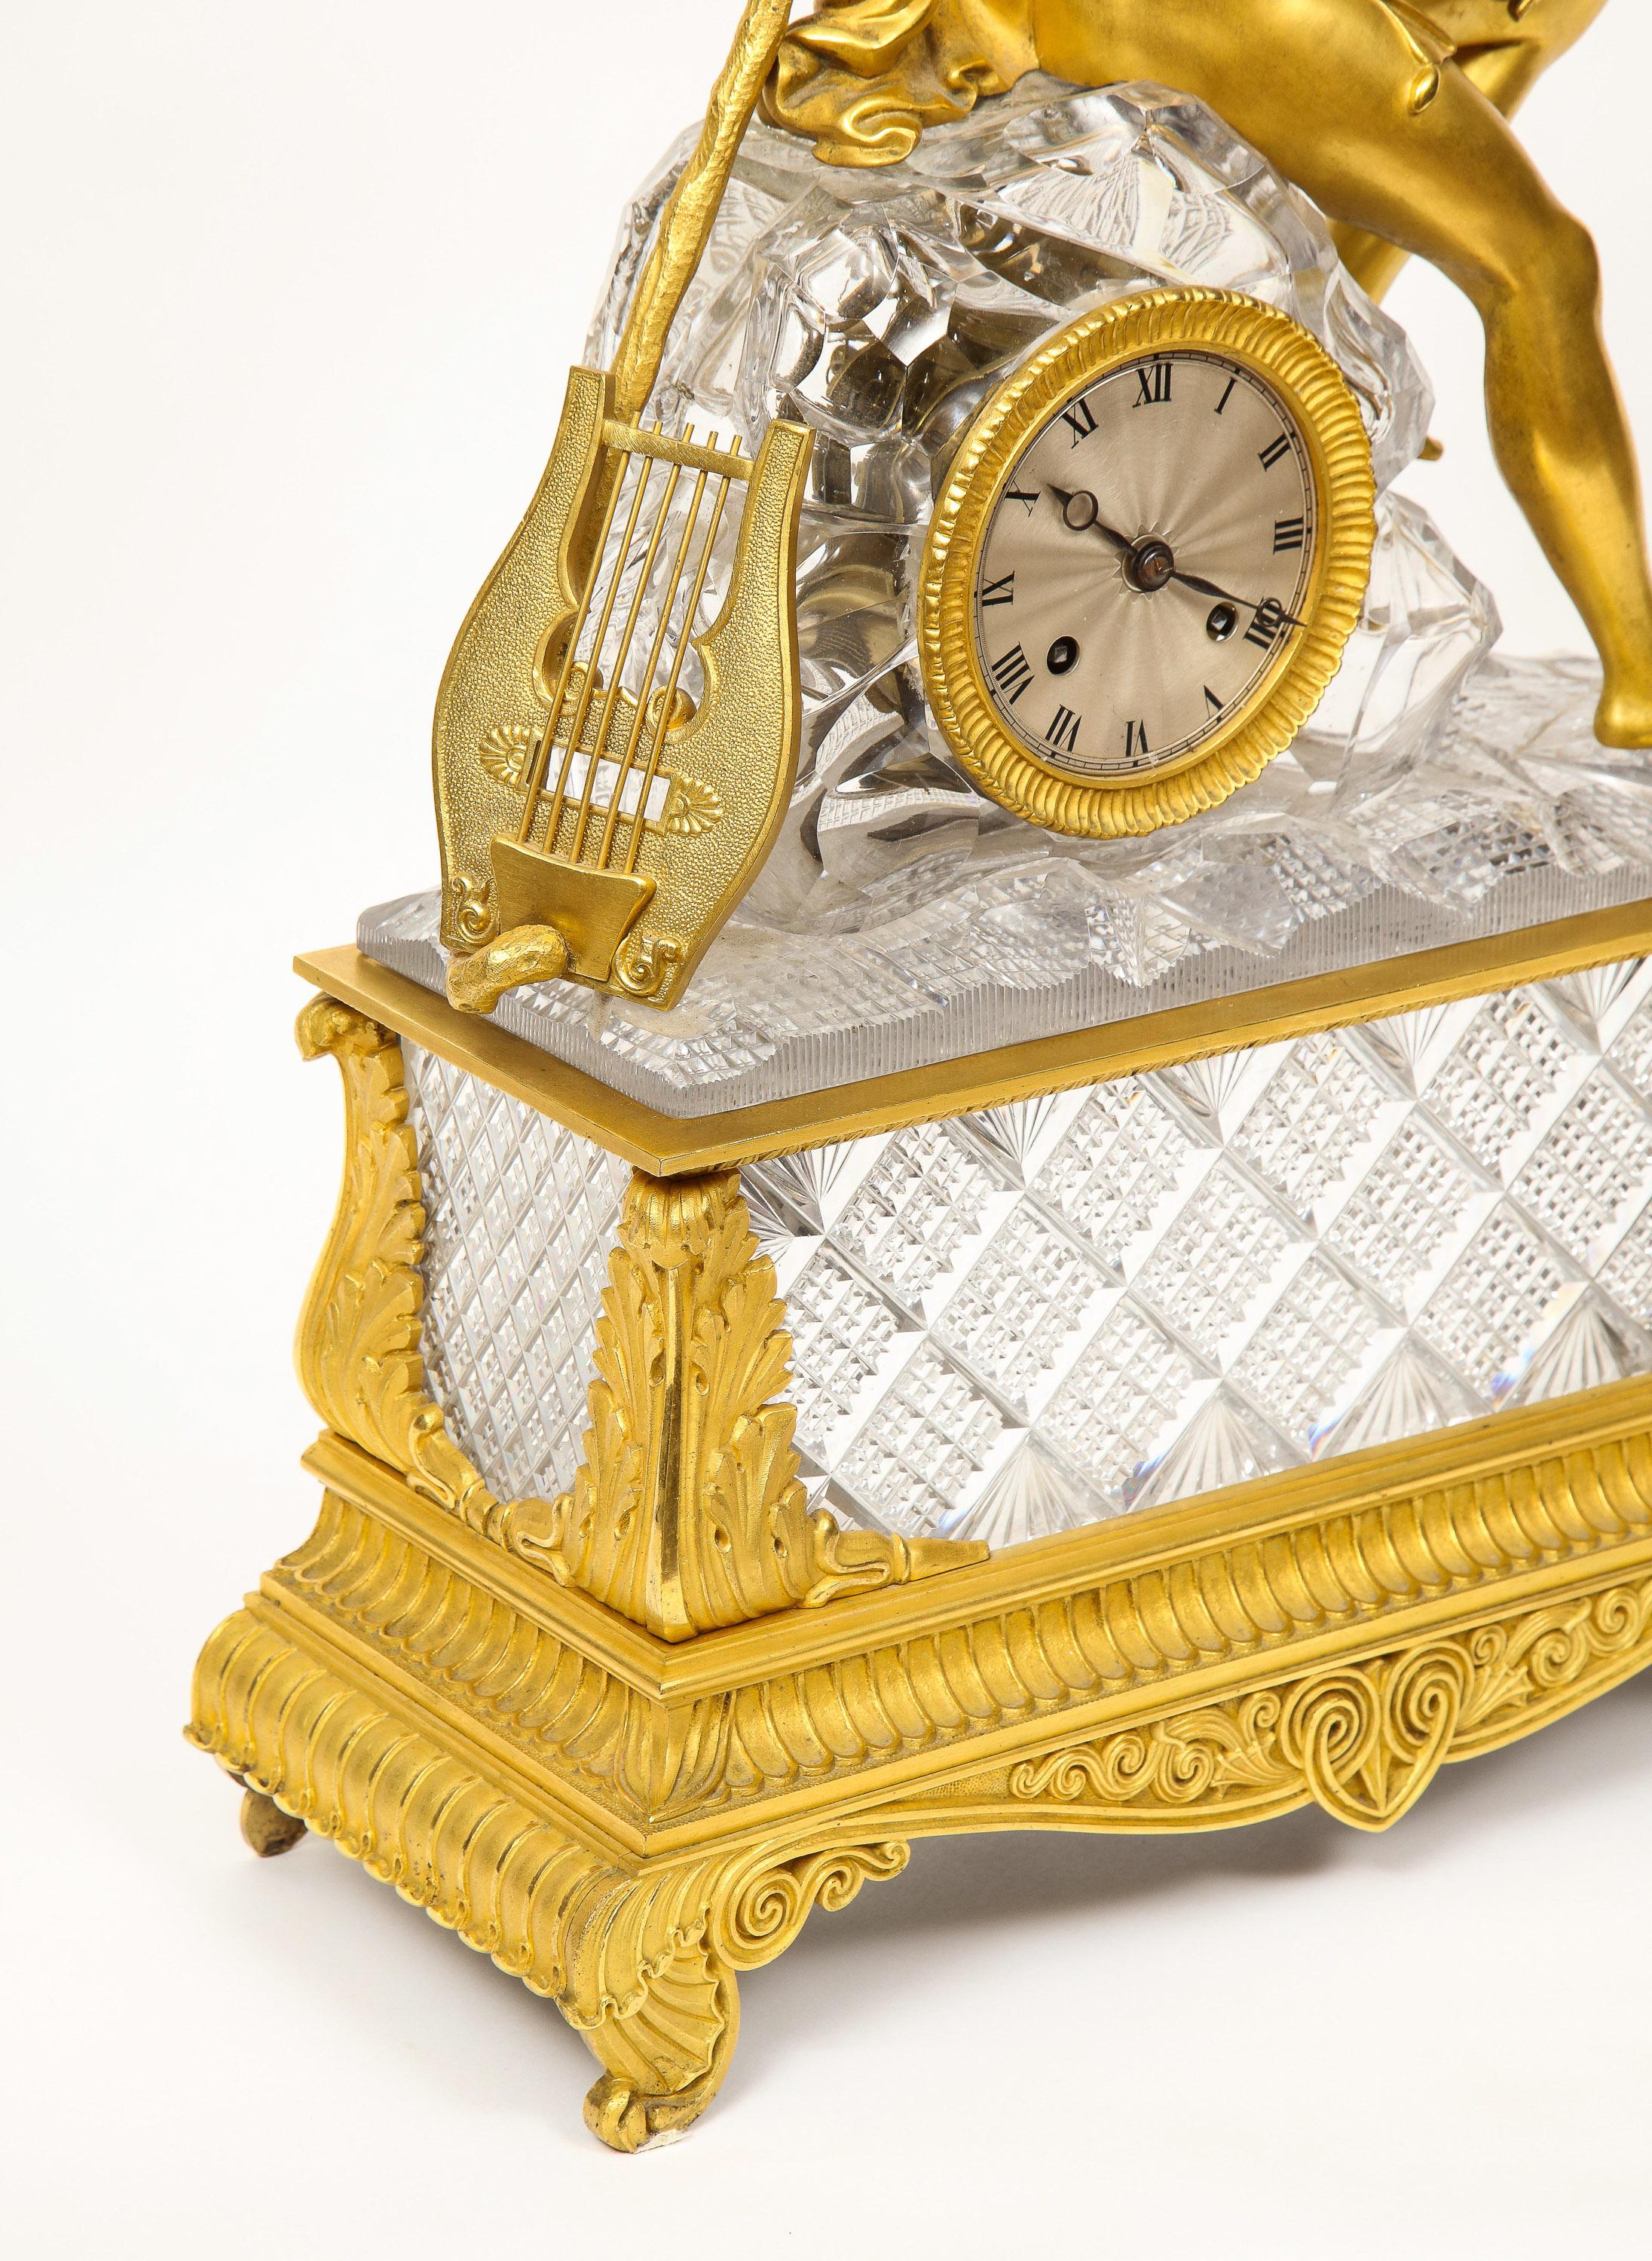 Exquisite French Empire Ormolu and Cut-Crystal Clock, c. 1815 For Sale 4